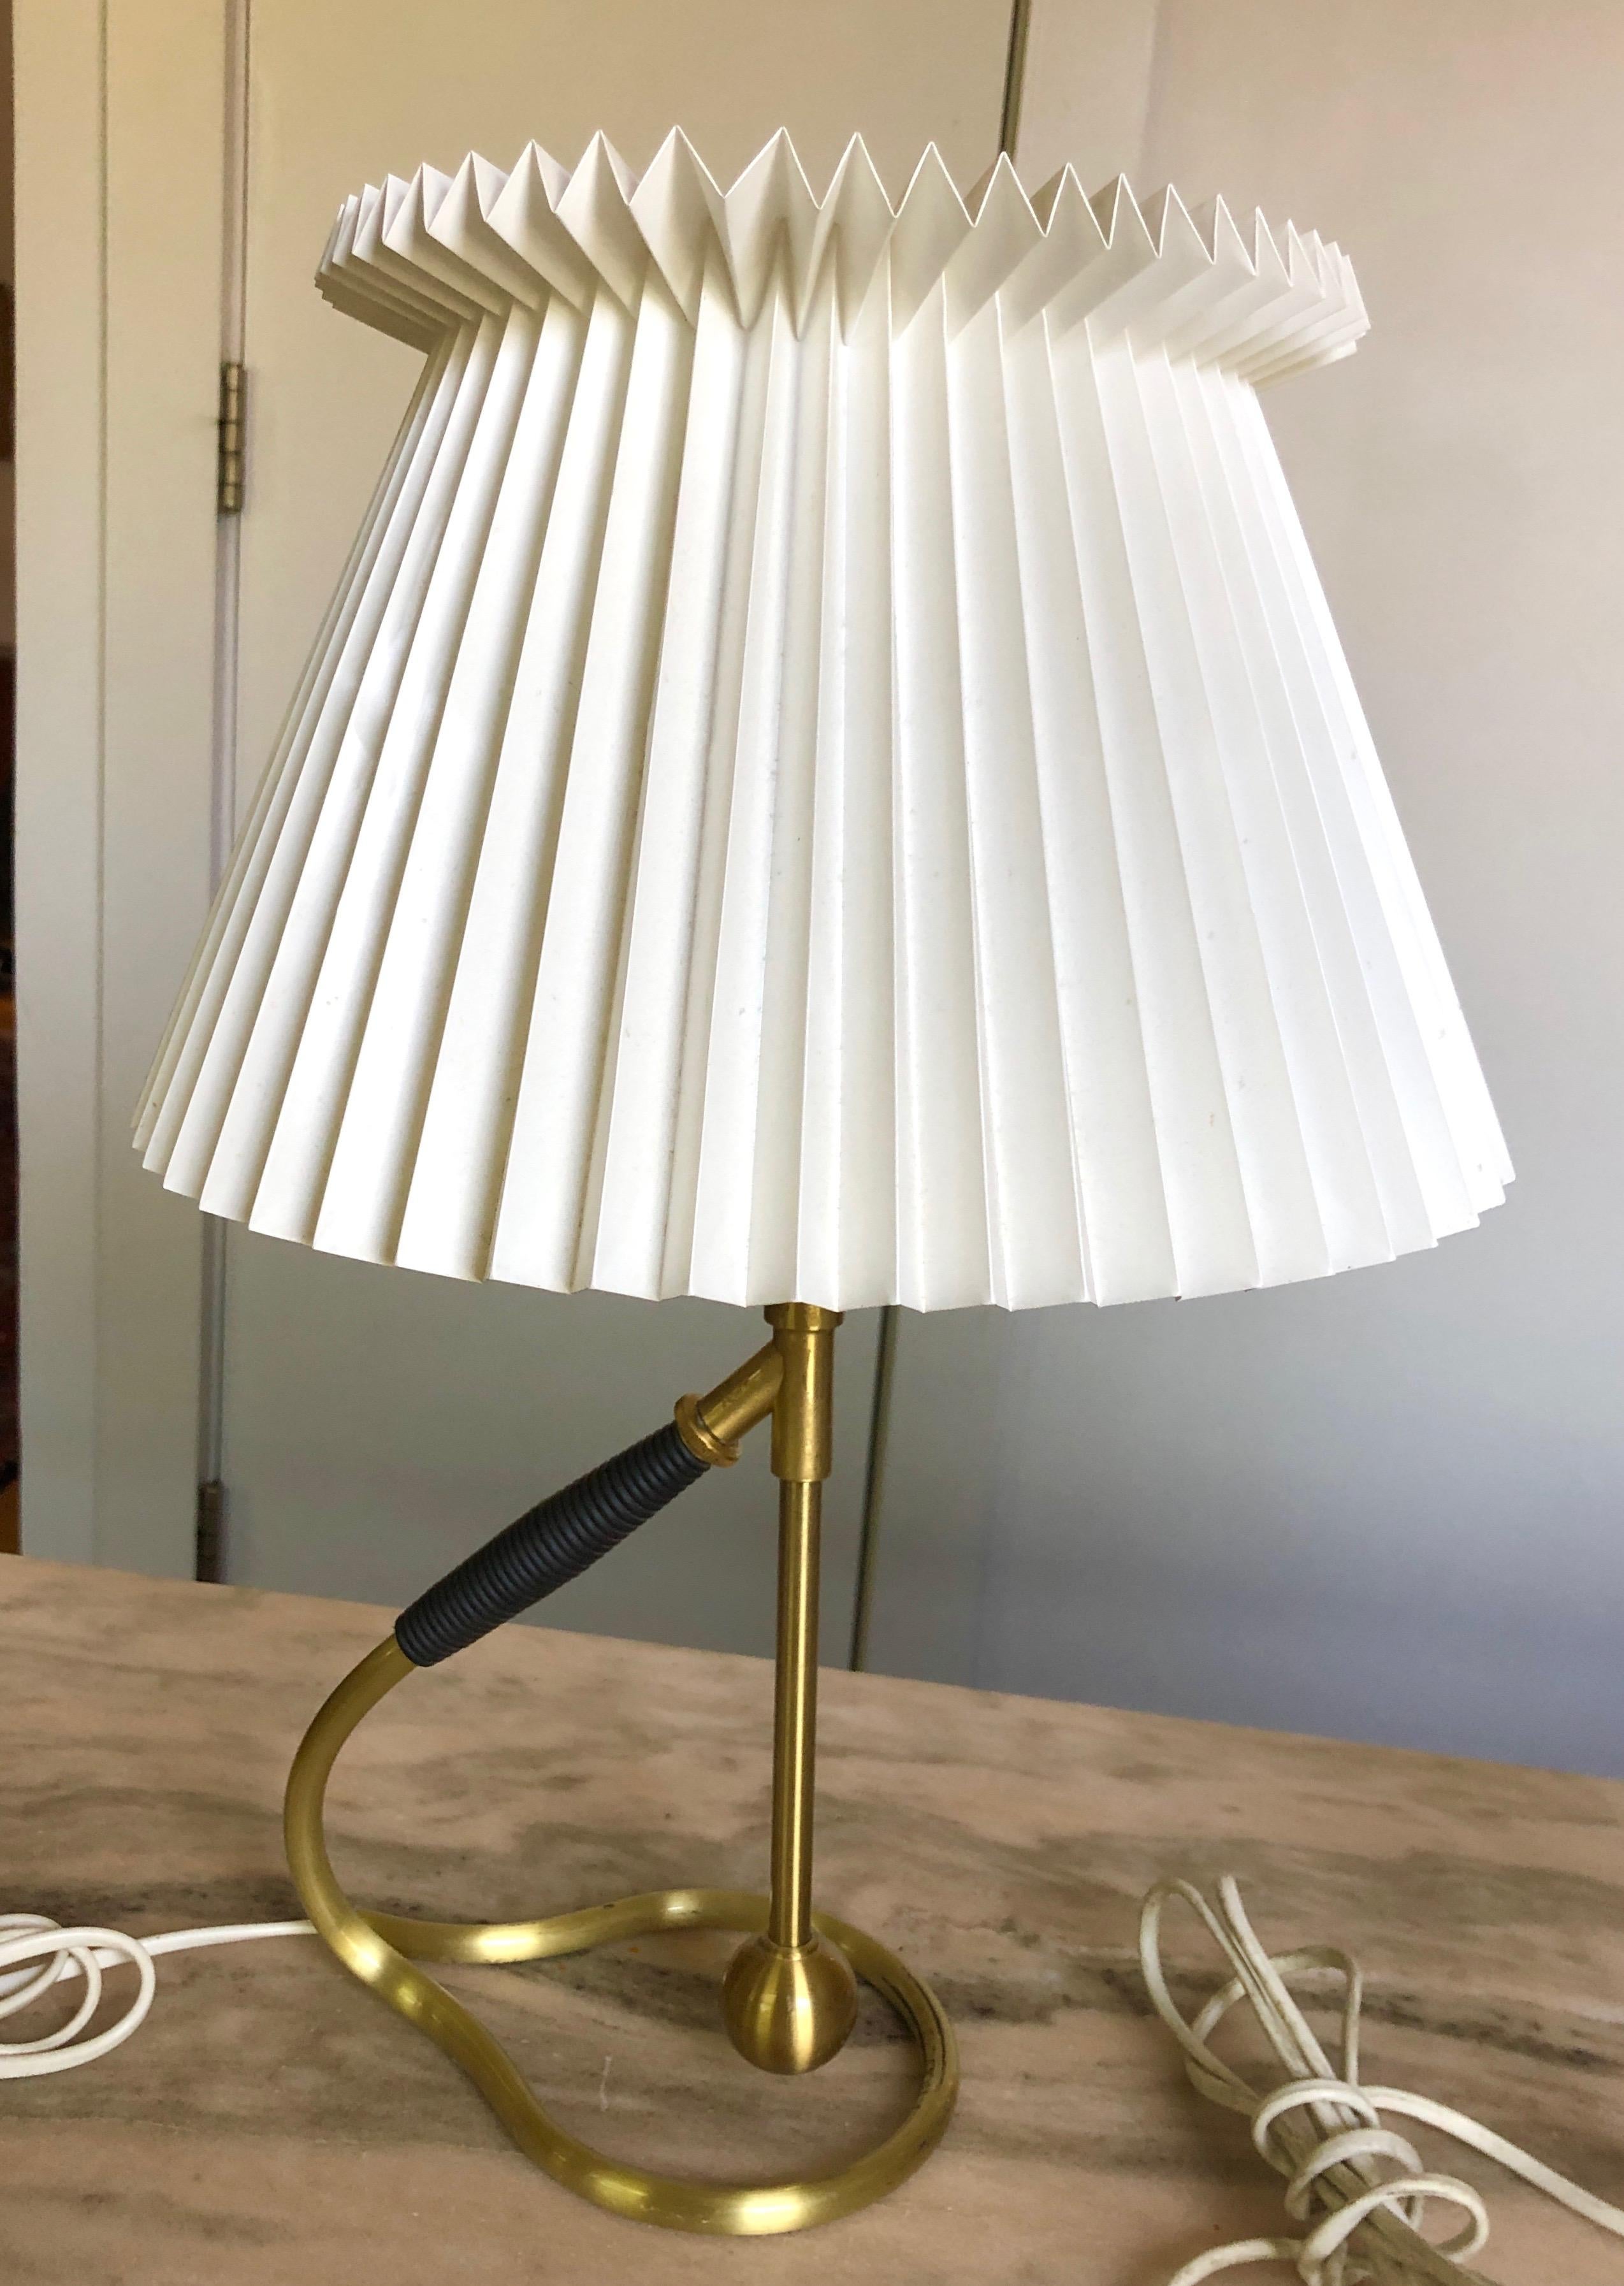 Brushed brass, faux leather wrapped handle, original pleated shade. Designed in the 1940s, this vintage pair is likely from the 1960s. The sculptural ingeniously transforms from table lamp to wall sconce by tilting the free-floating pendulum in the